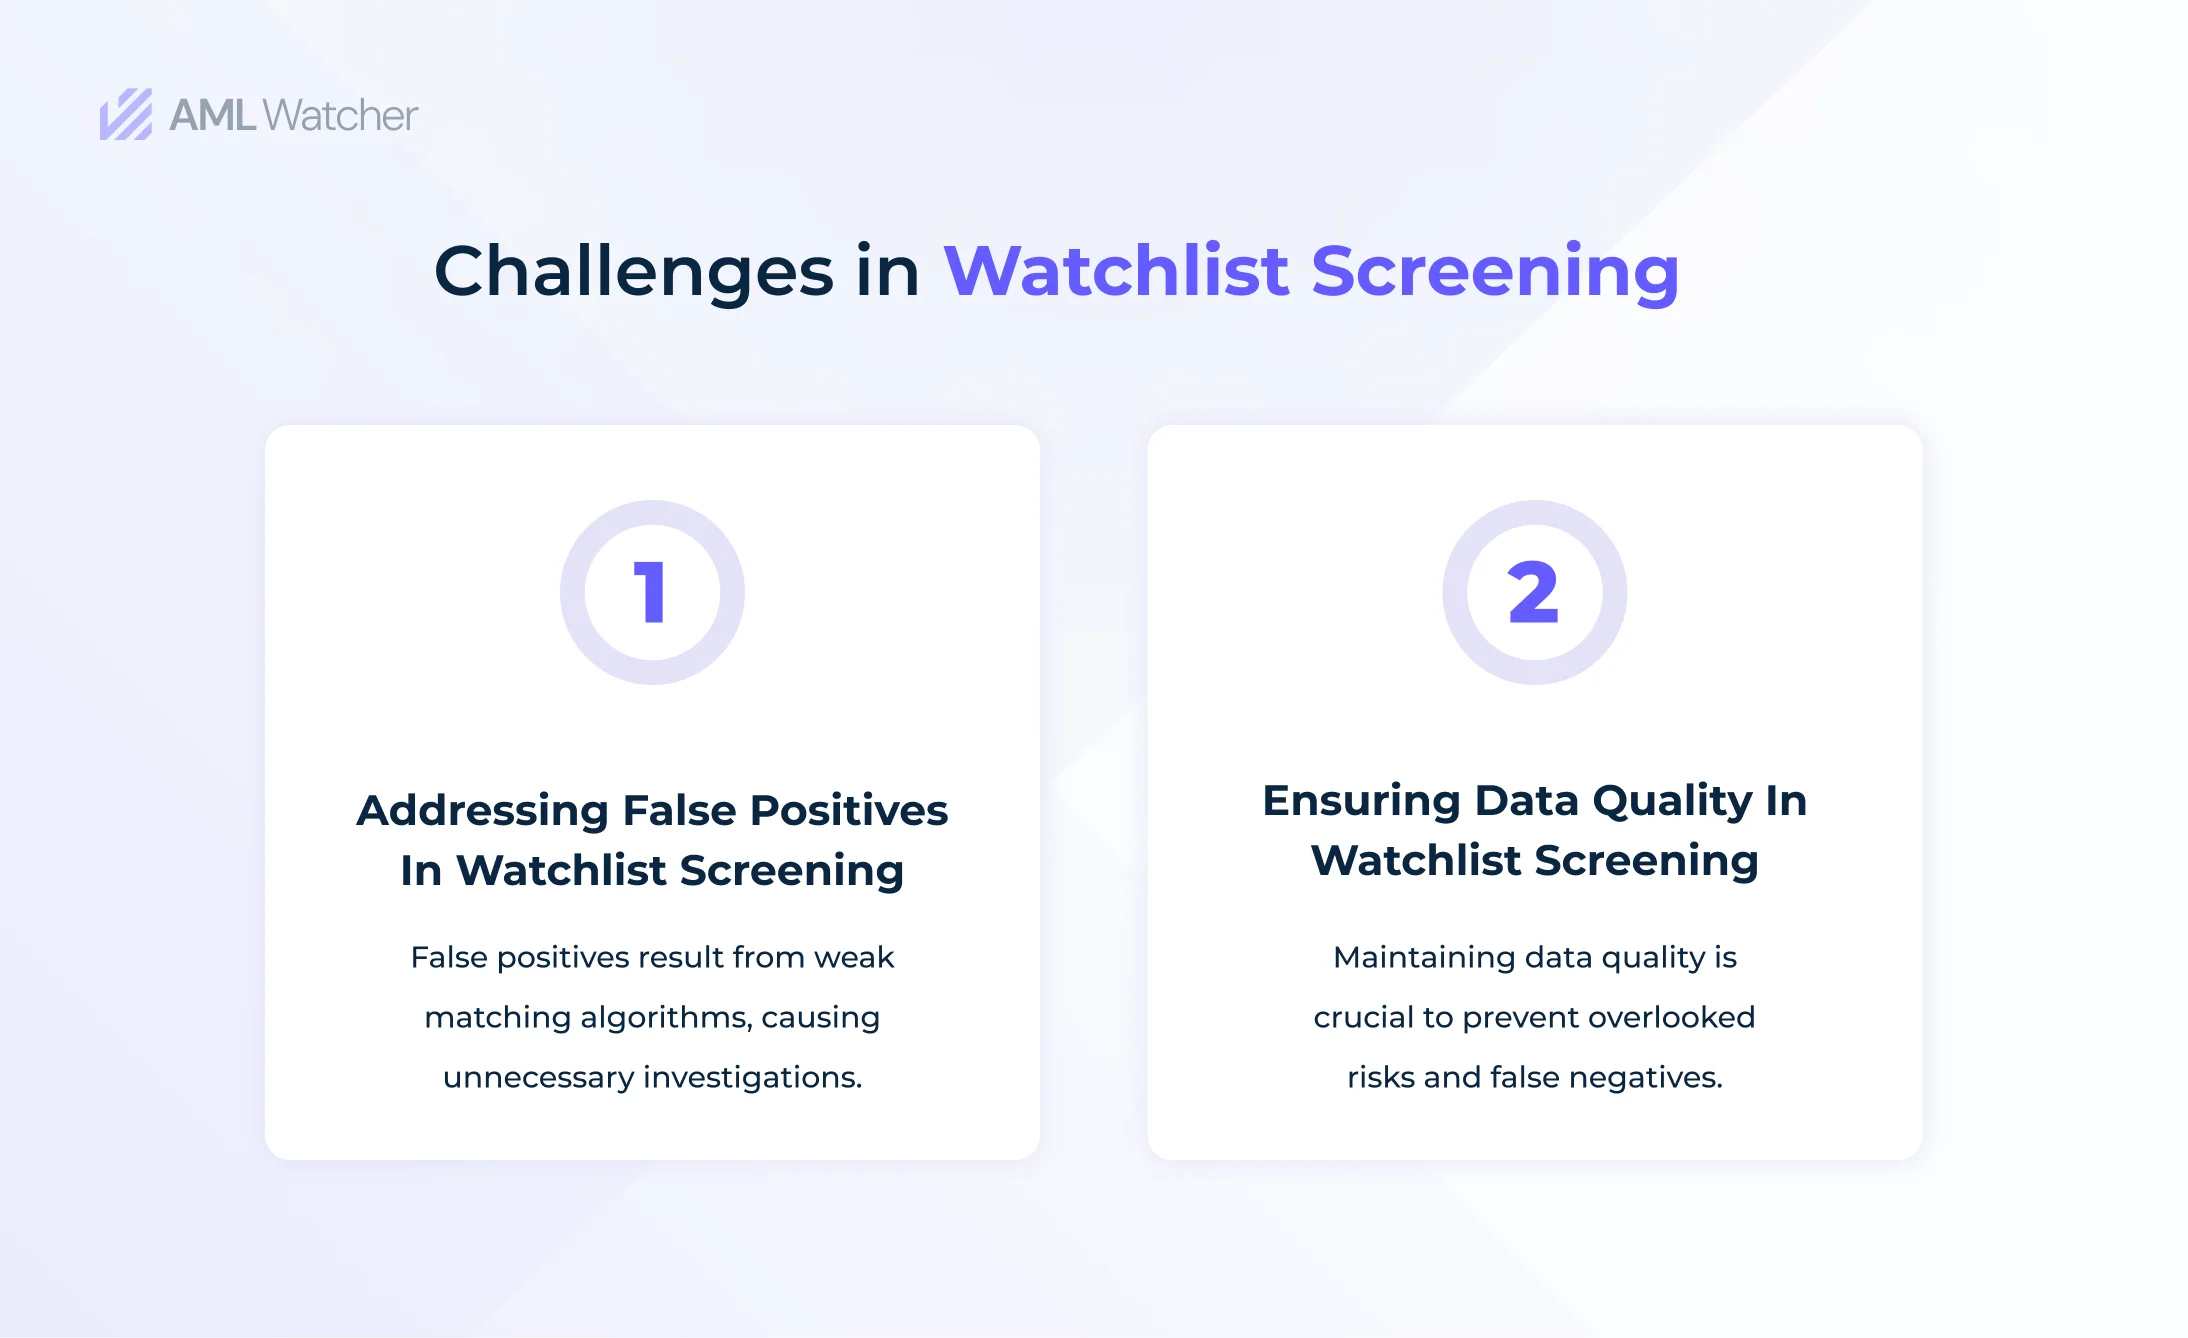 The challenges of watchlist screening require a balance and refinement of screening processes and technologies for efficiency.